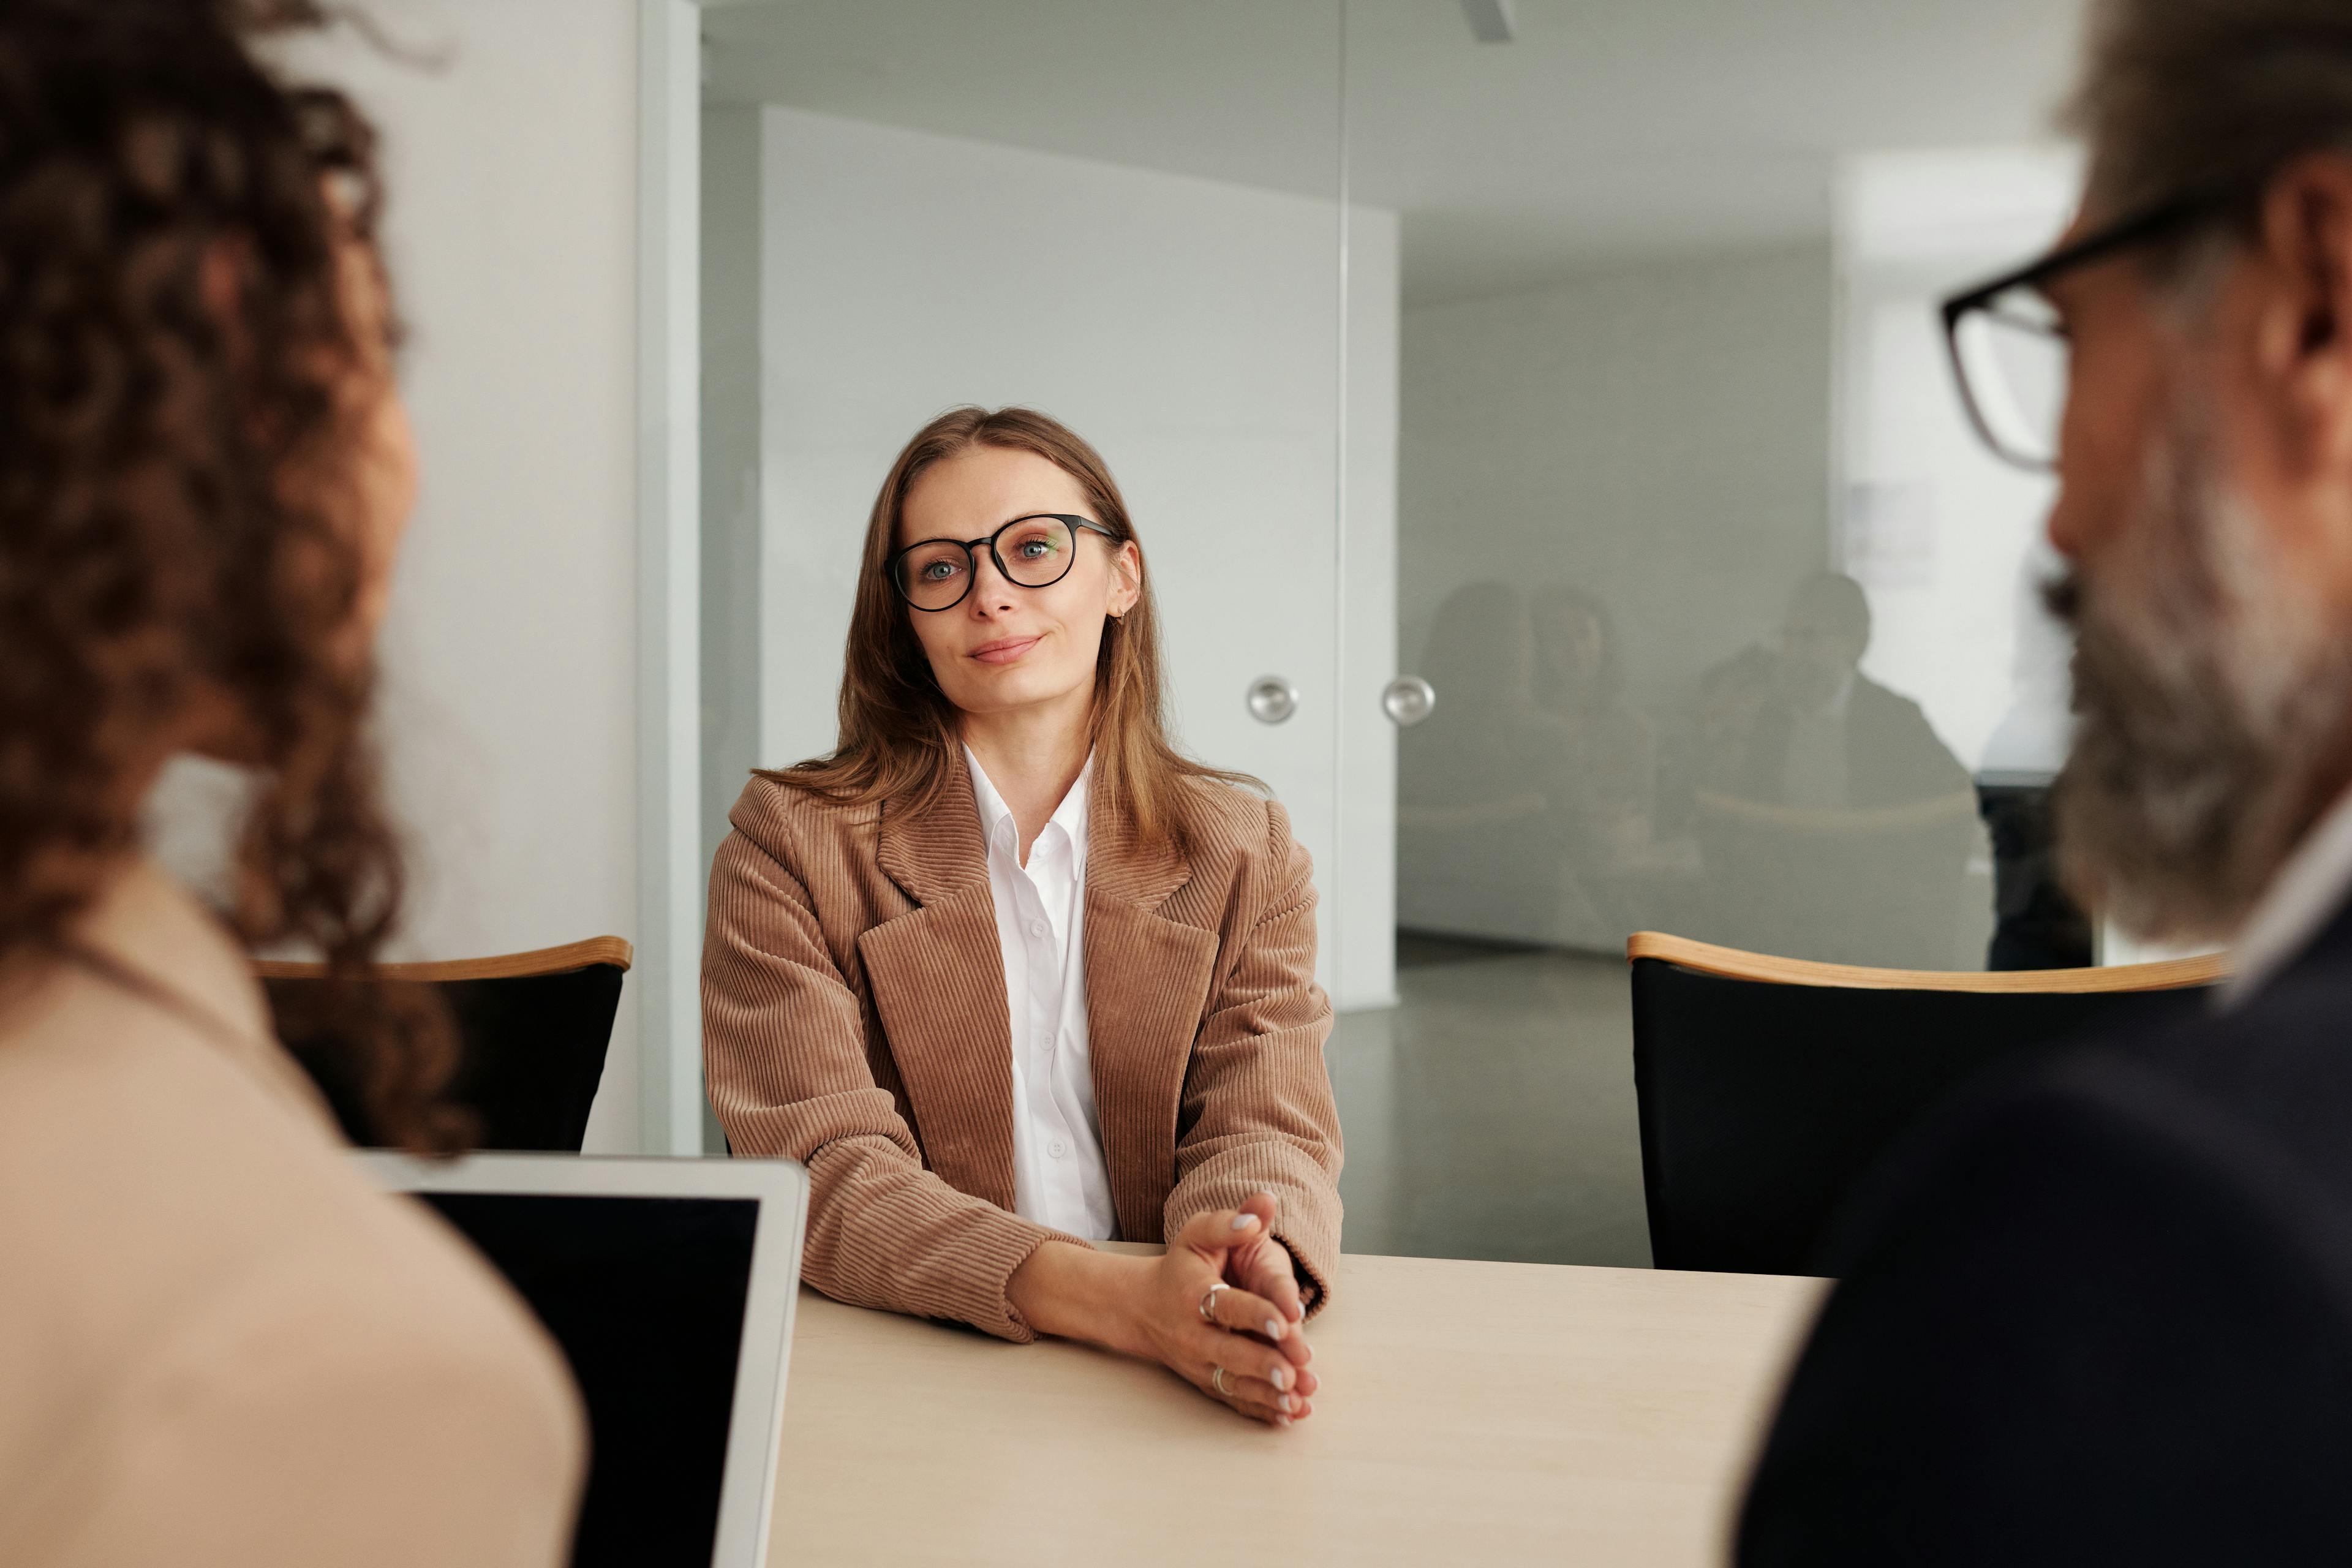 Nail Your Next Job Interview With These 11 Strategies for Exuding Confidence